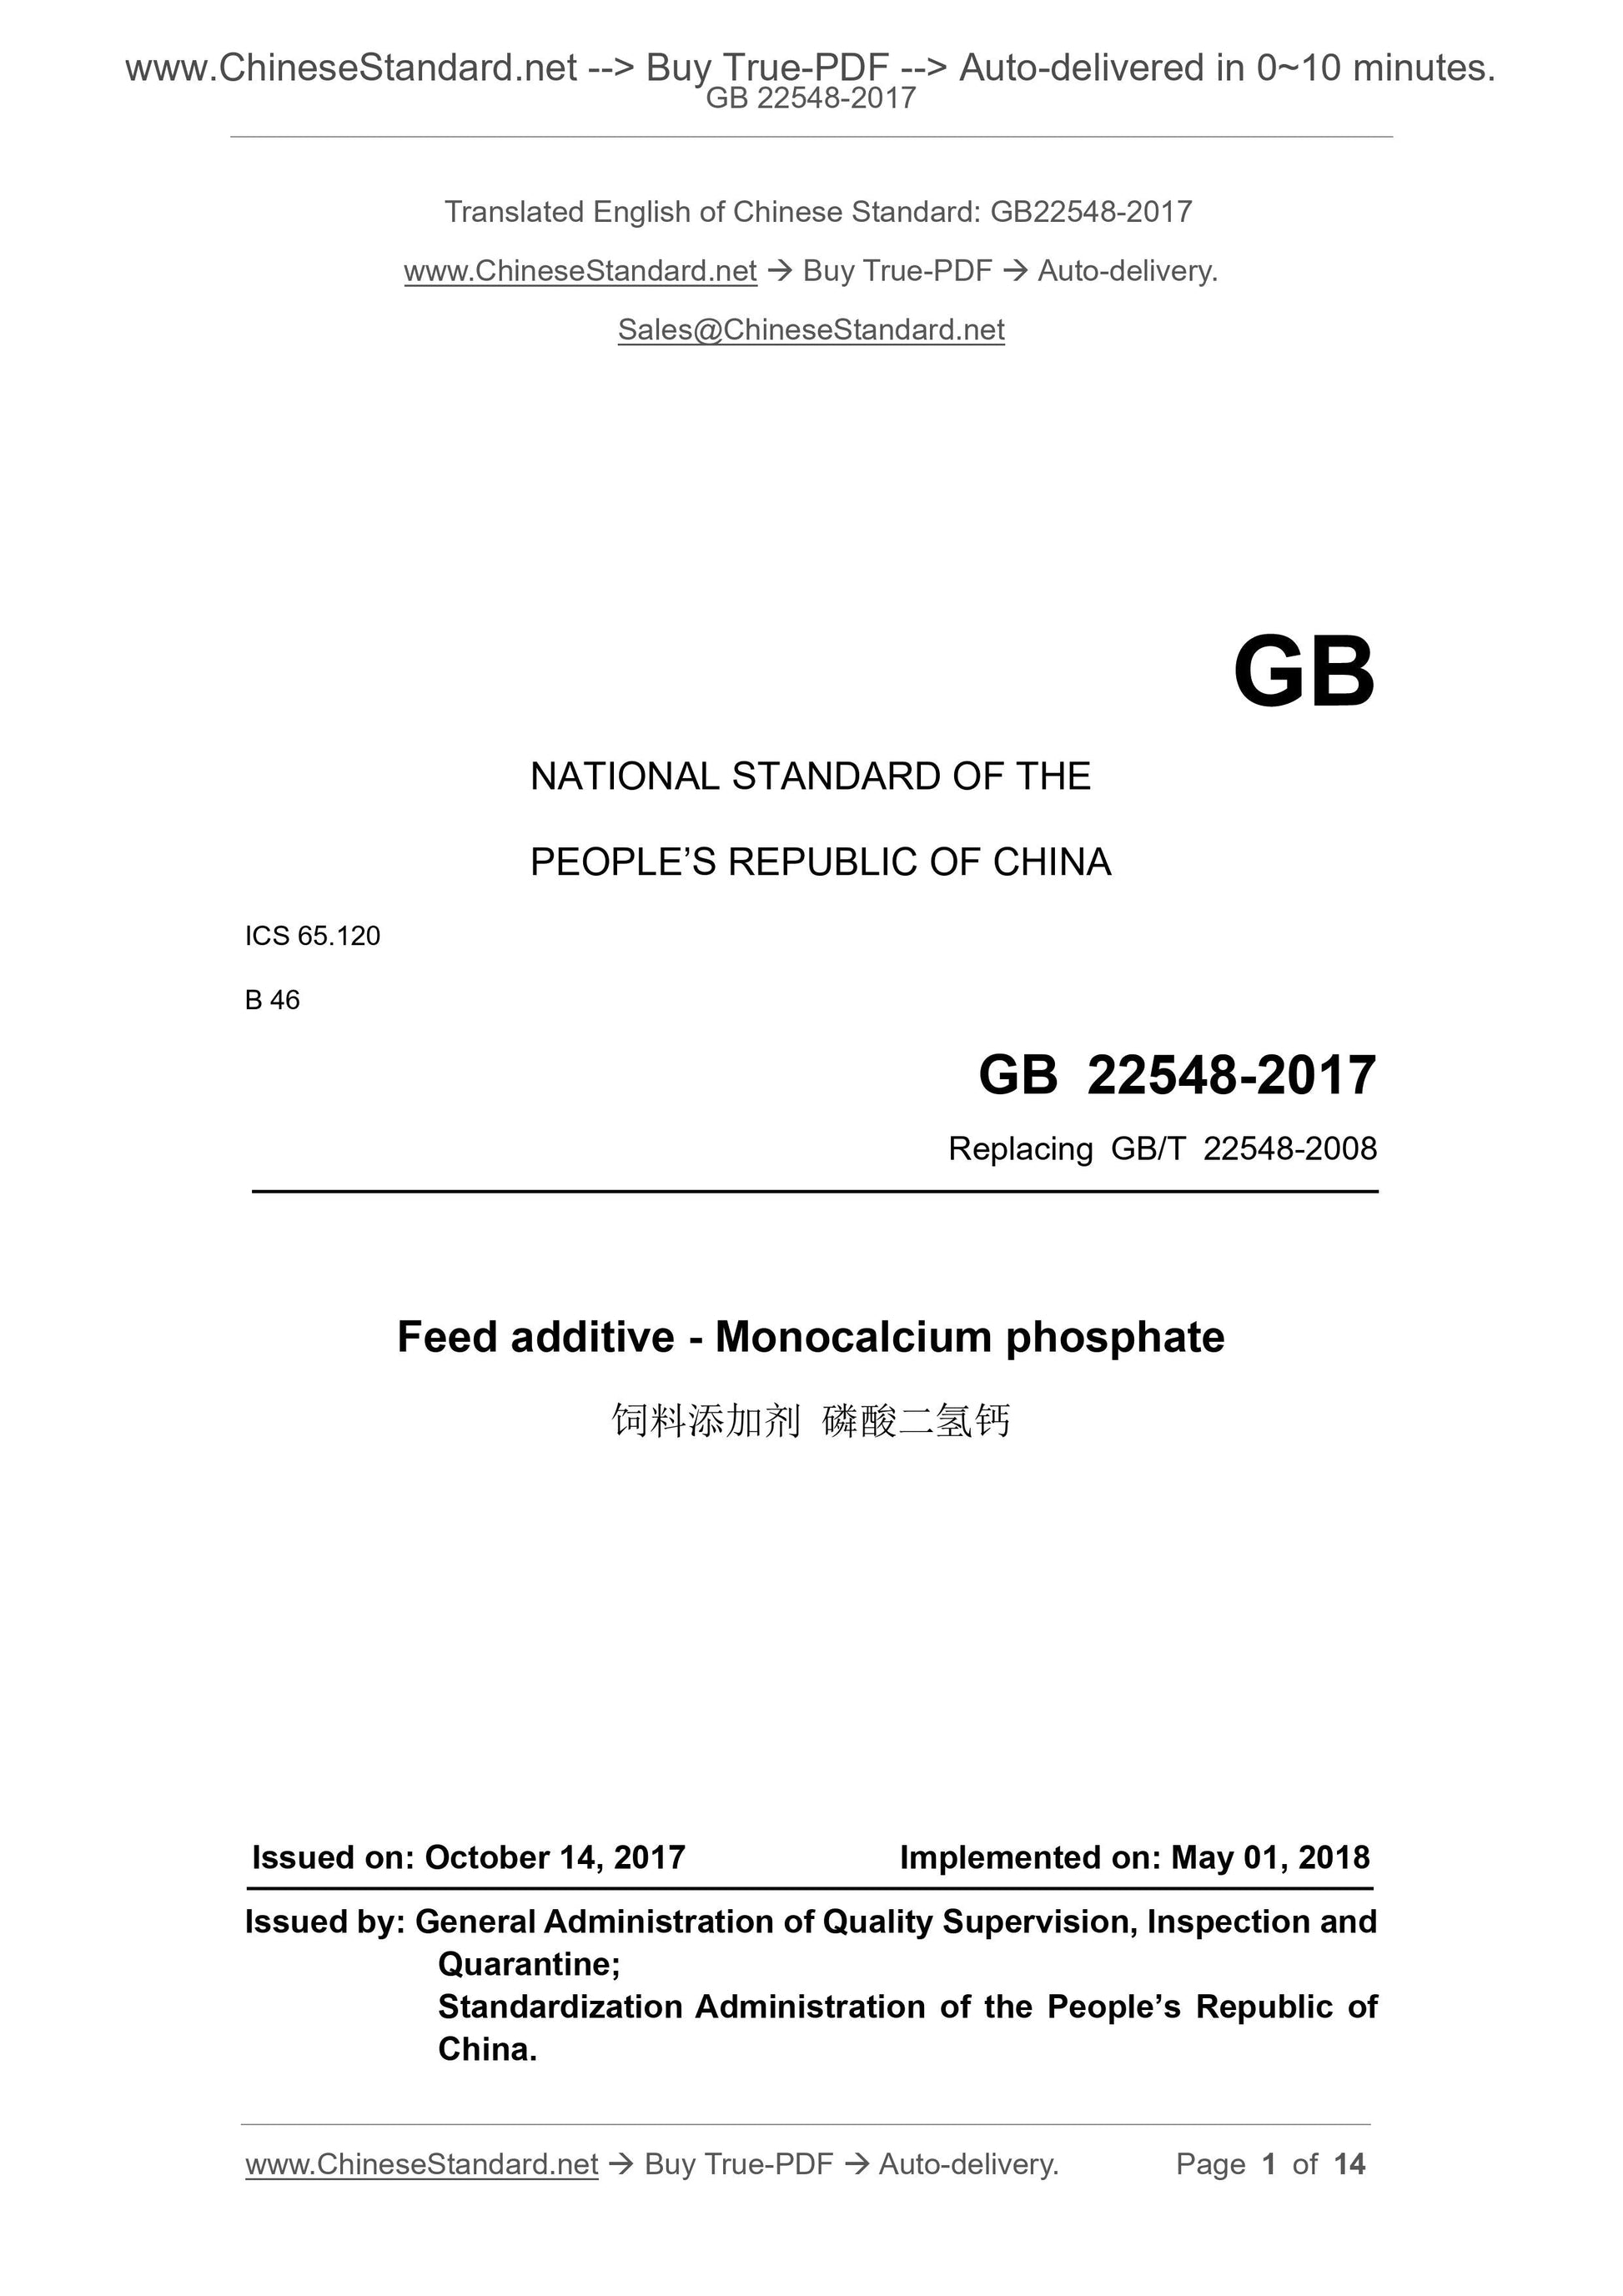 GB 22548-2017 Page 1